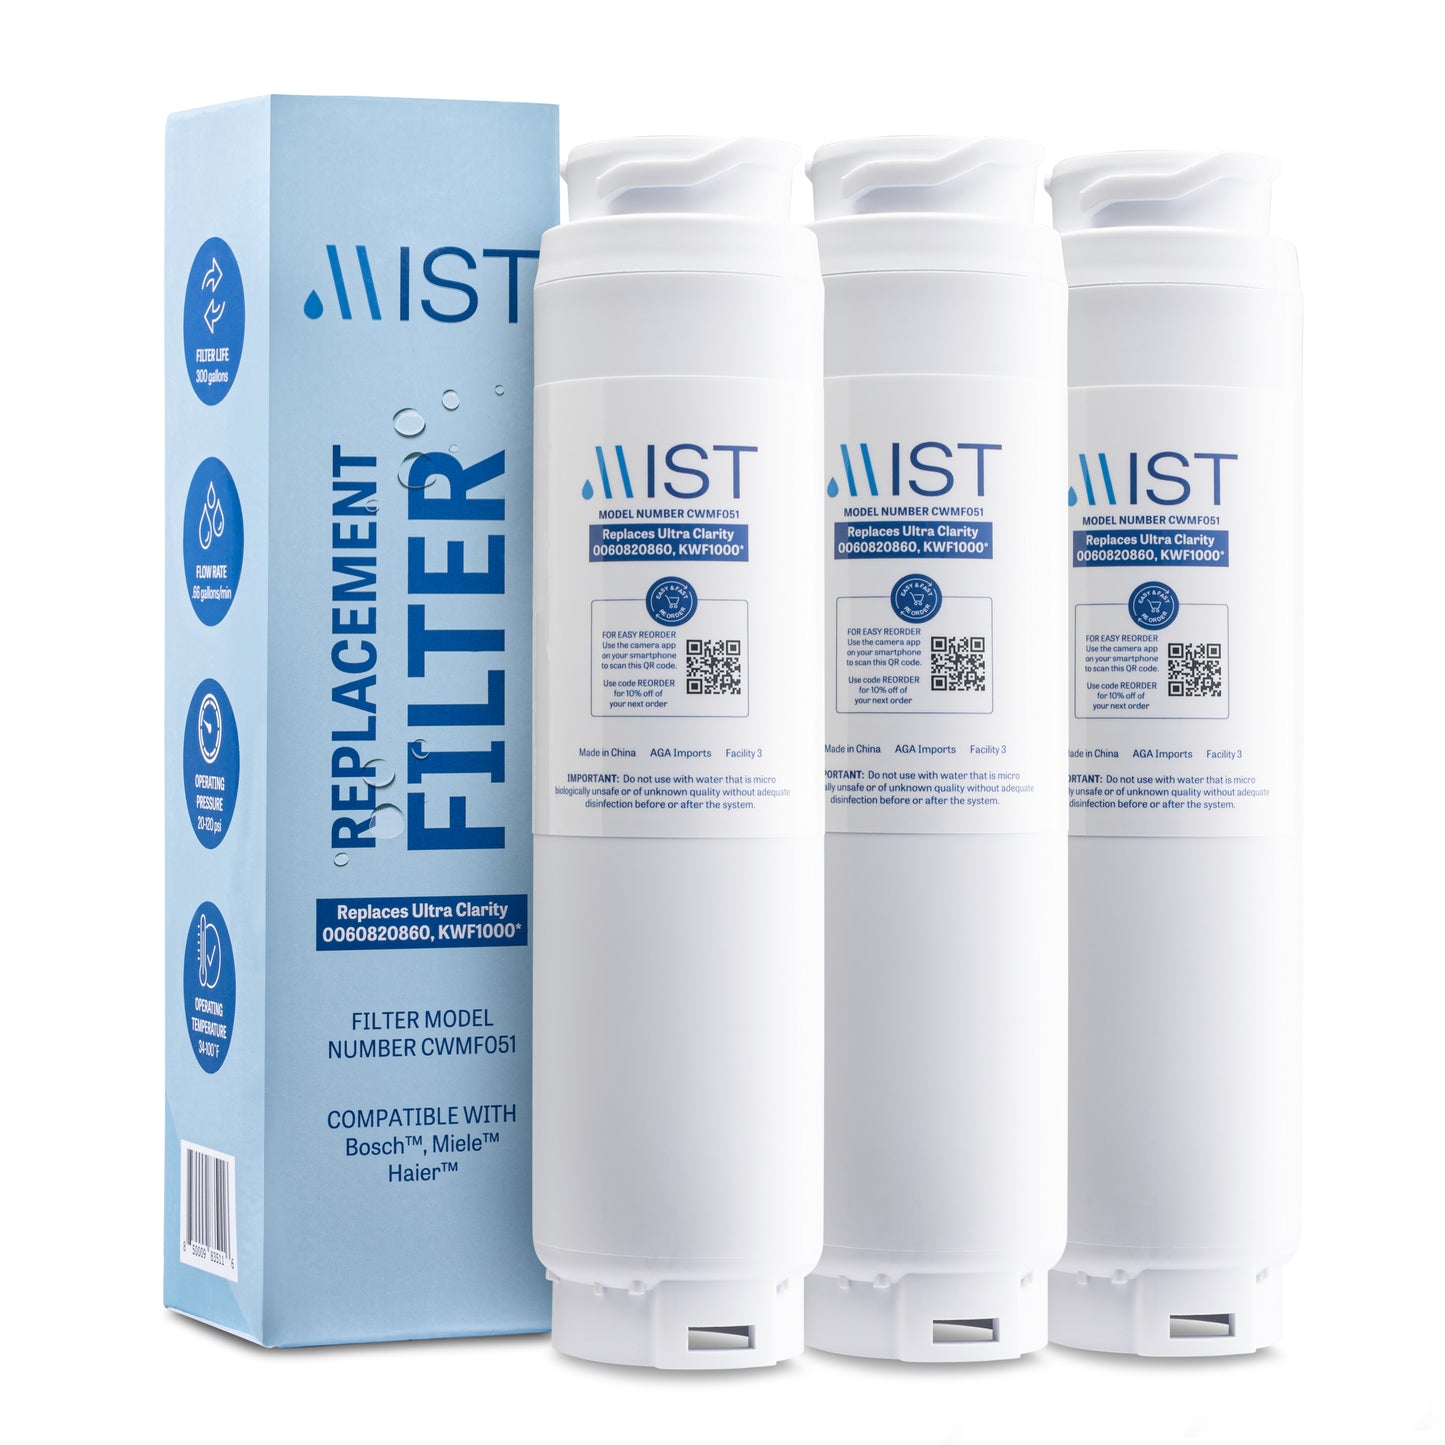 Ultra Clarity, 644845, 9000077104, 9000194412, Haier 0060820860, 0060218744, Miele KWF1000 Refrigerator Water Filter